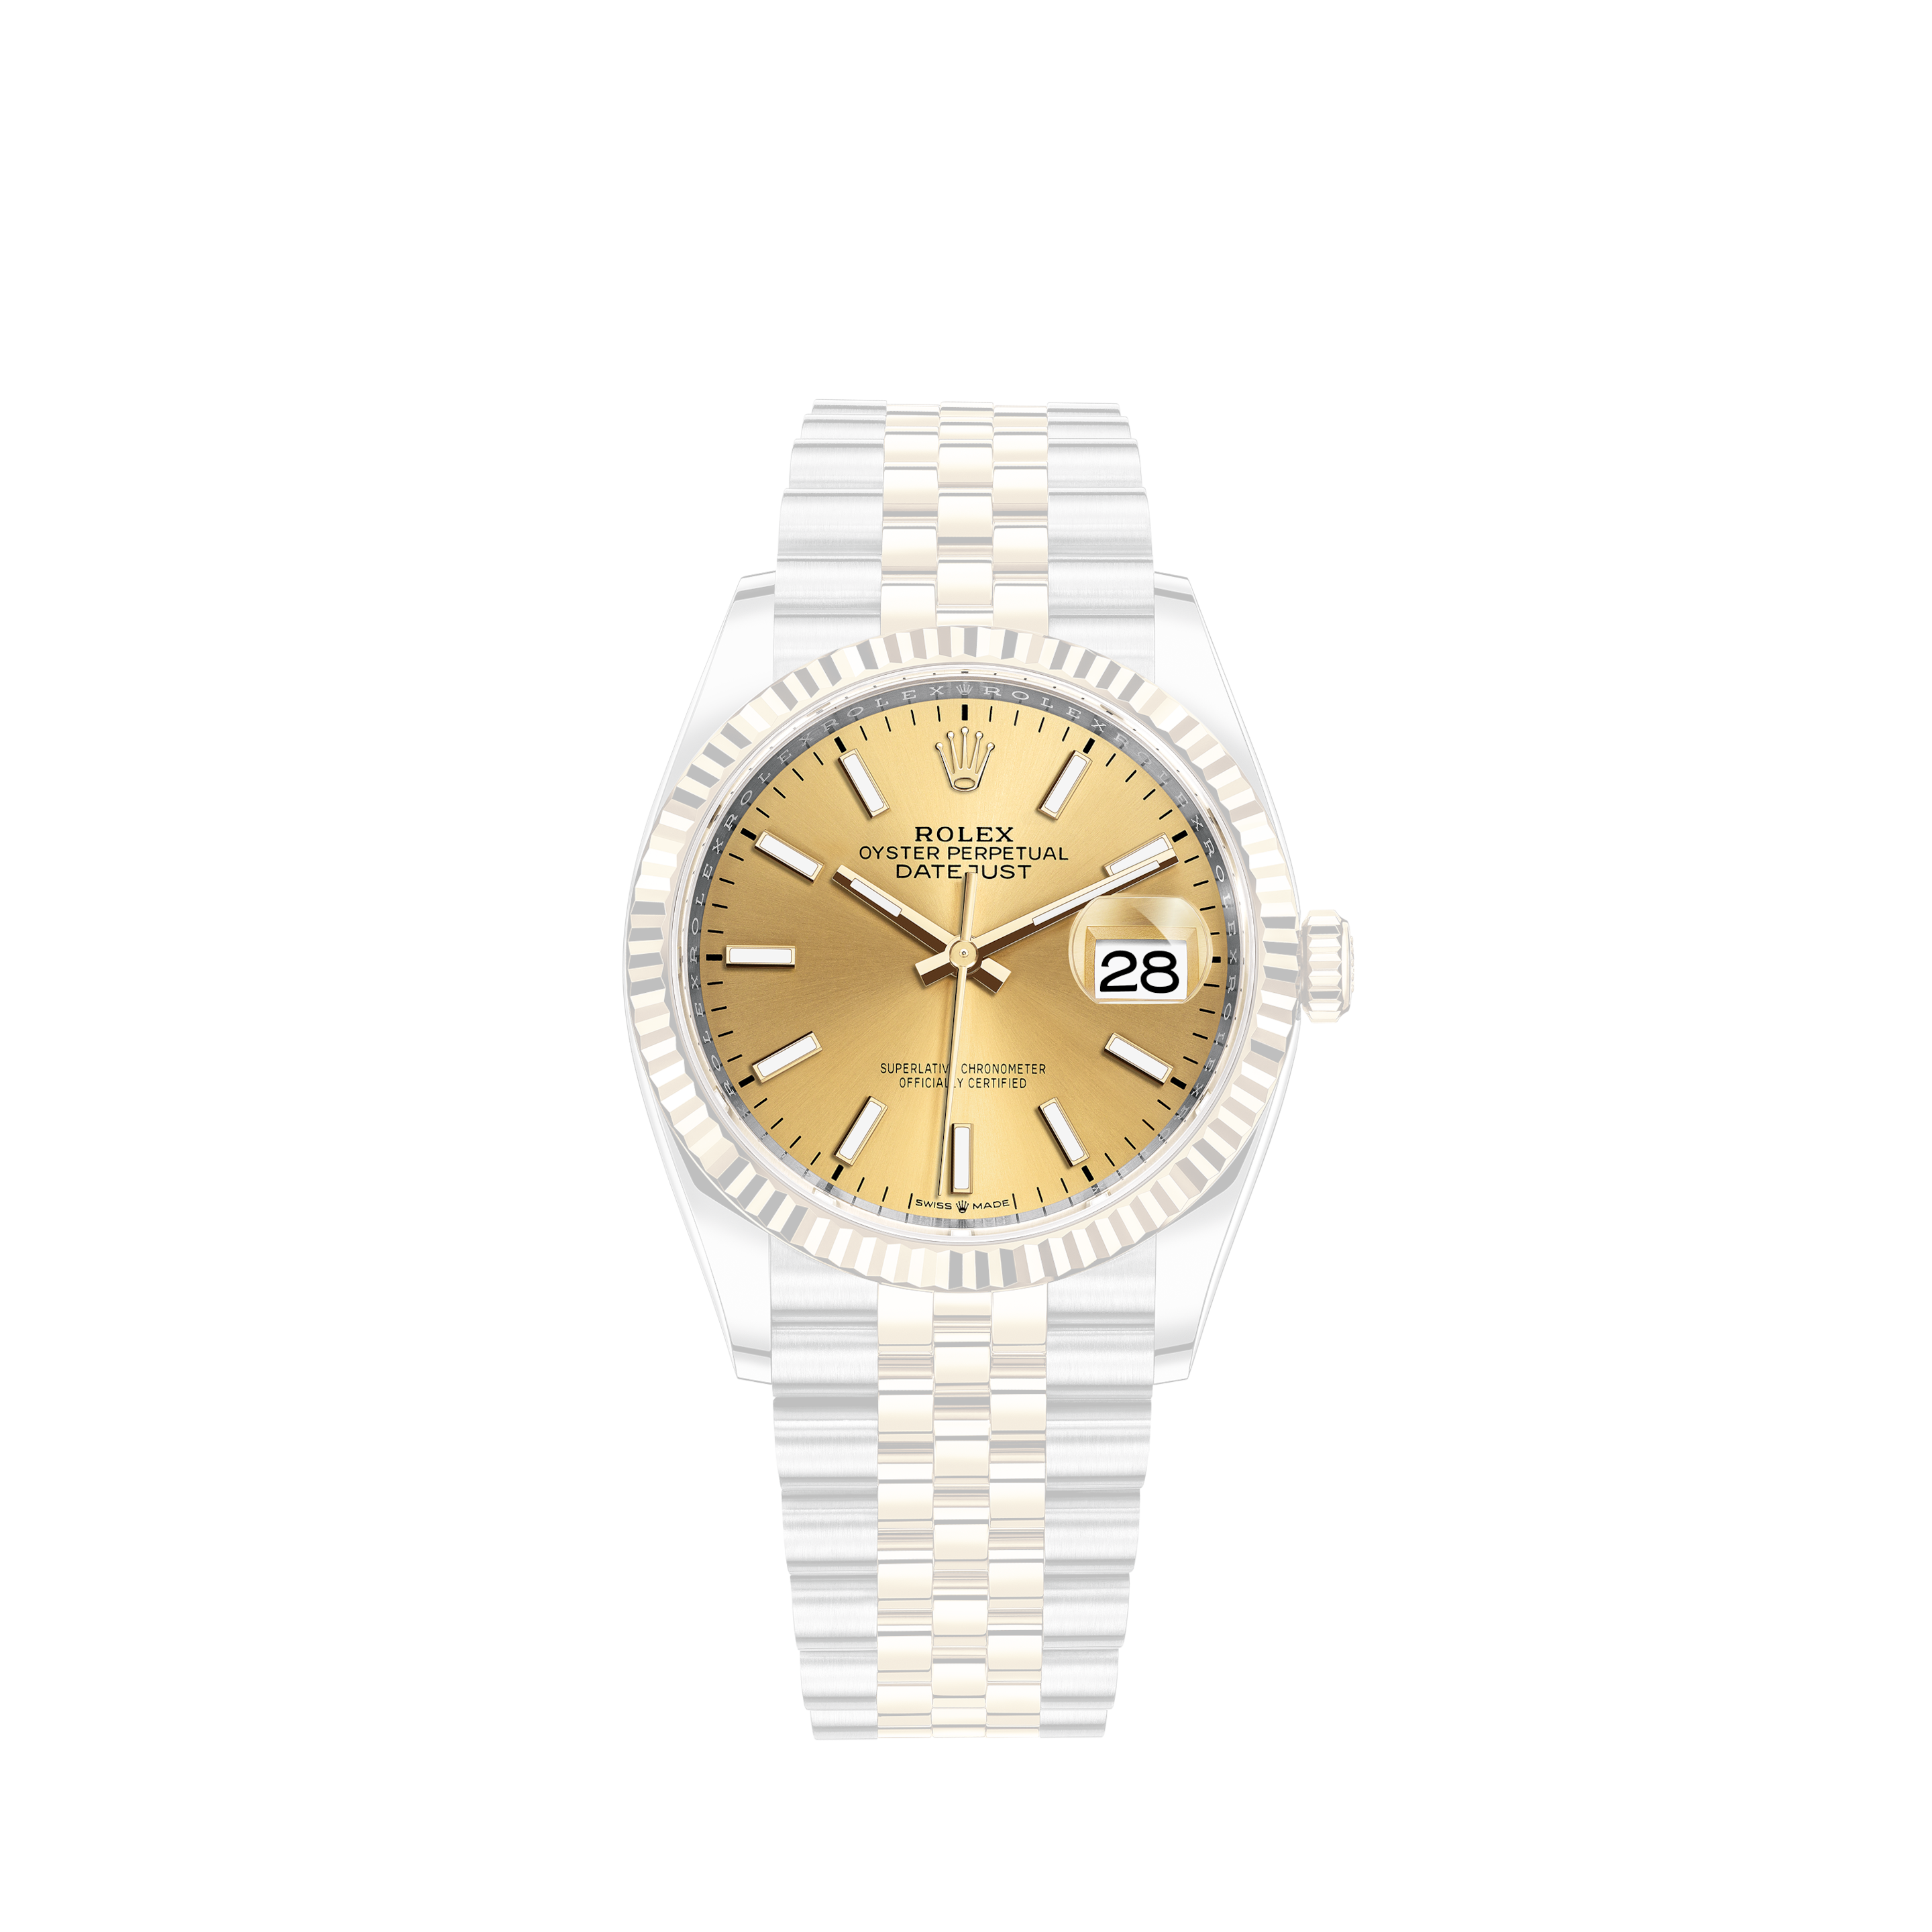 Rolex Random Number October 2018 Domestic Regular Gala ROLEX Rolex Watch Datejust 179171NR Shell Lotus Flower Ladies Automatic Roll Pink Gold Stainless Steel PG SS (2143300132342)[431]